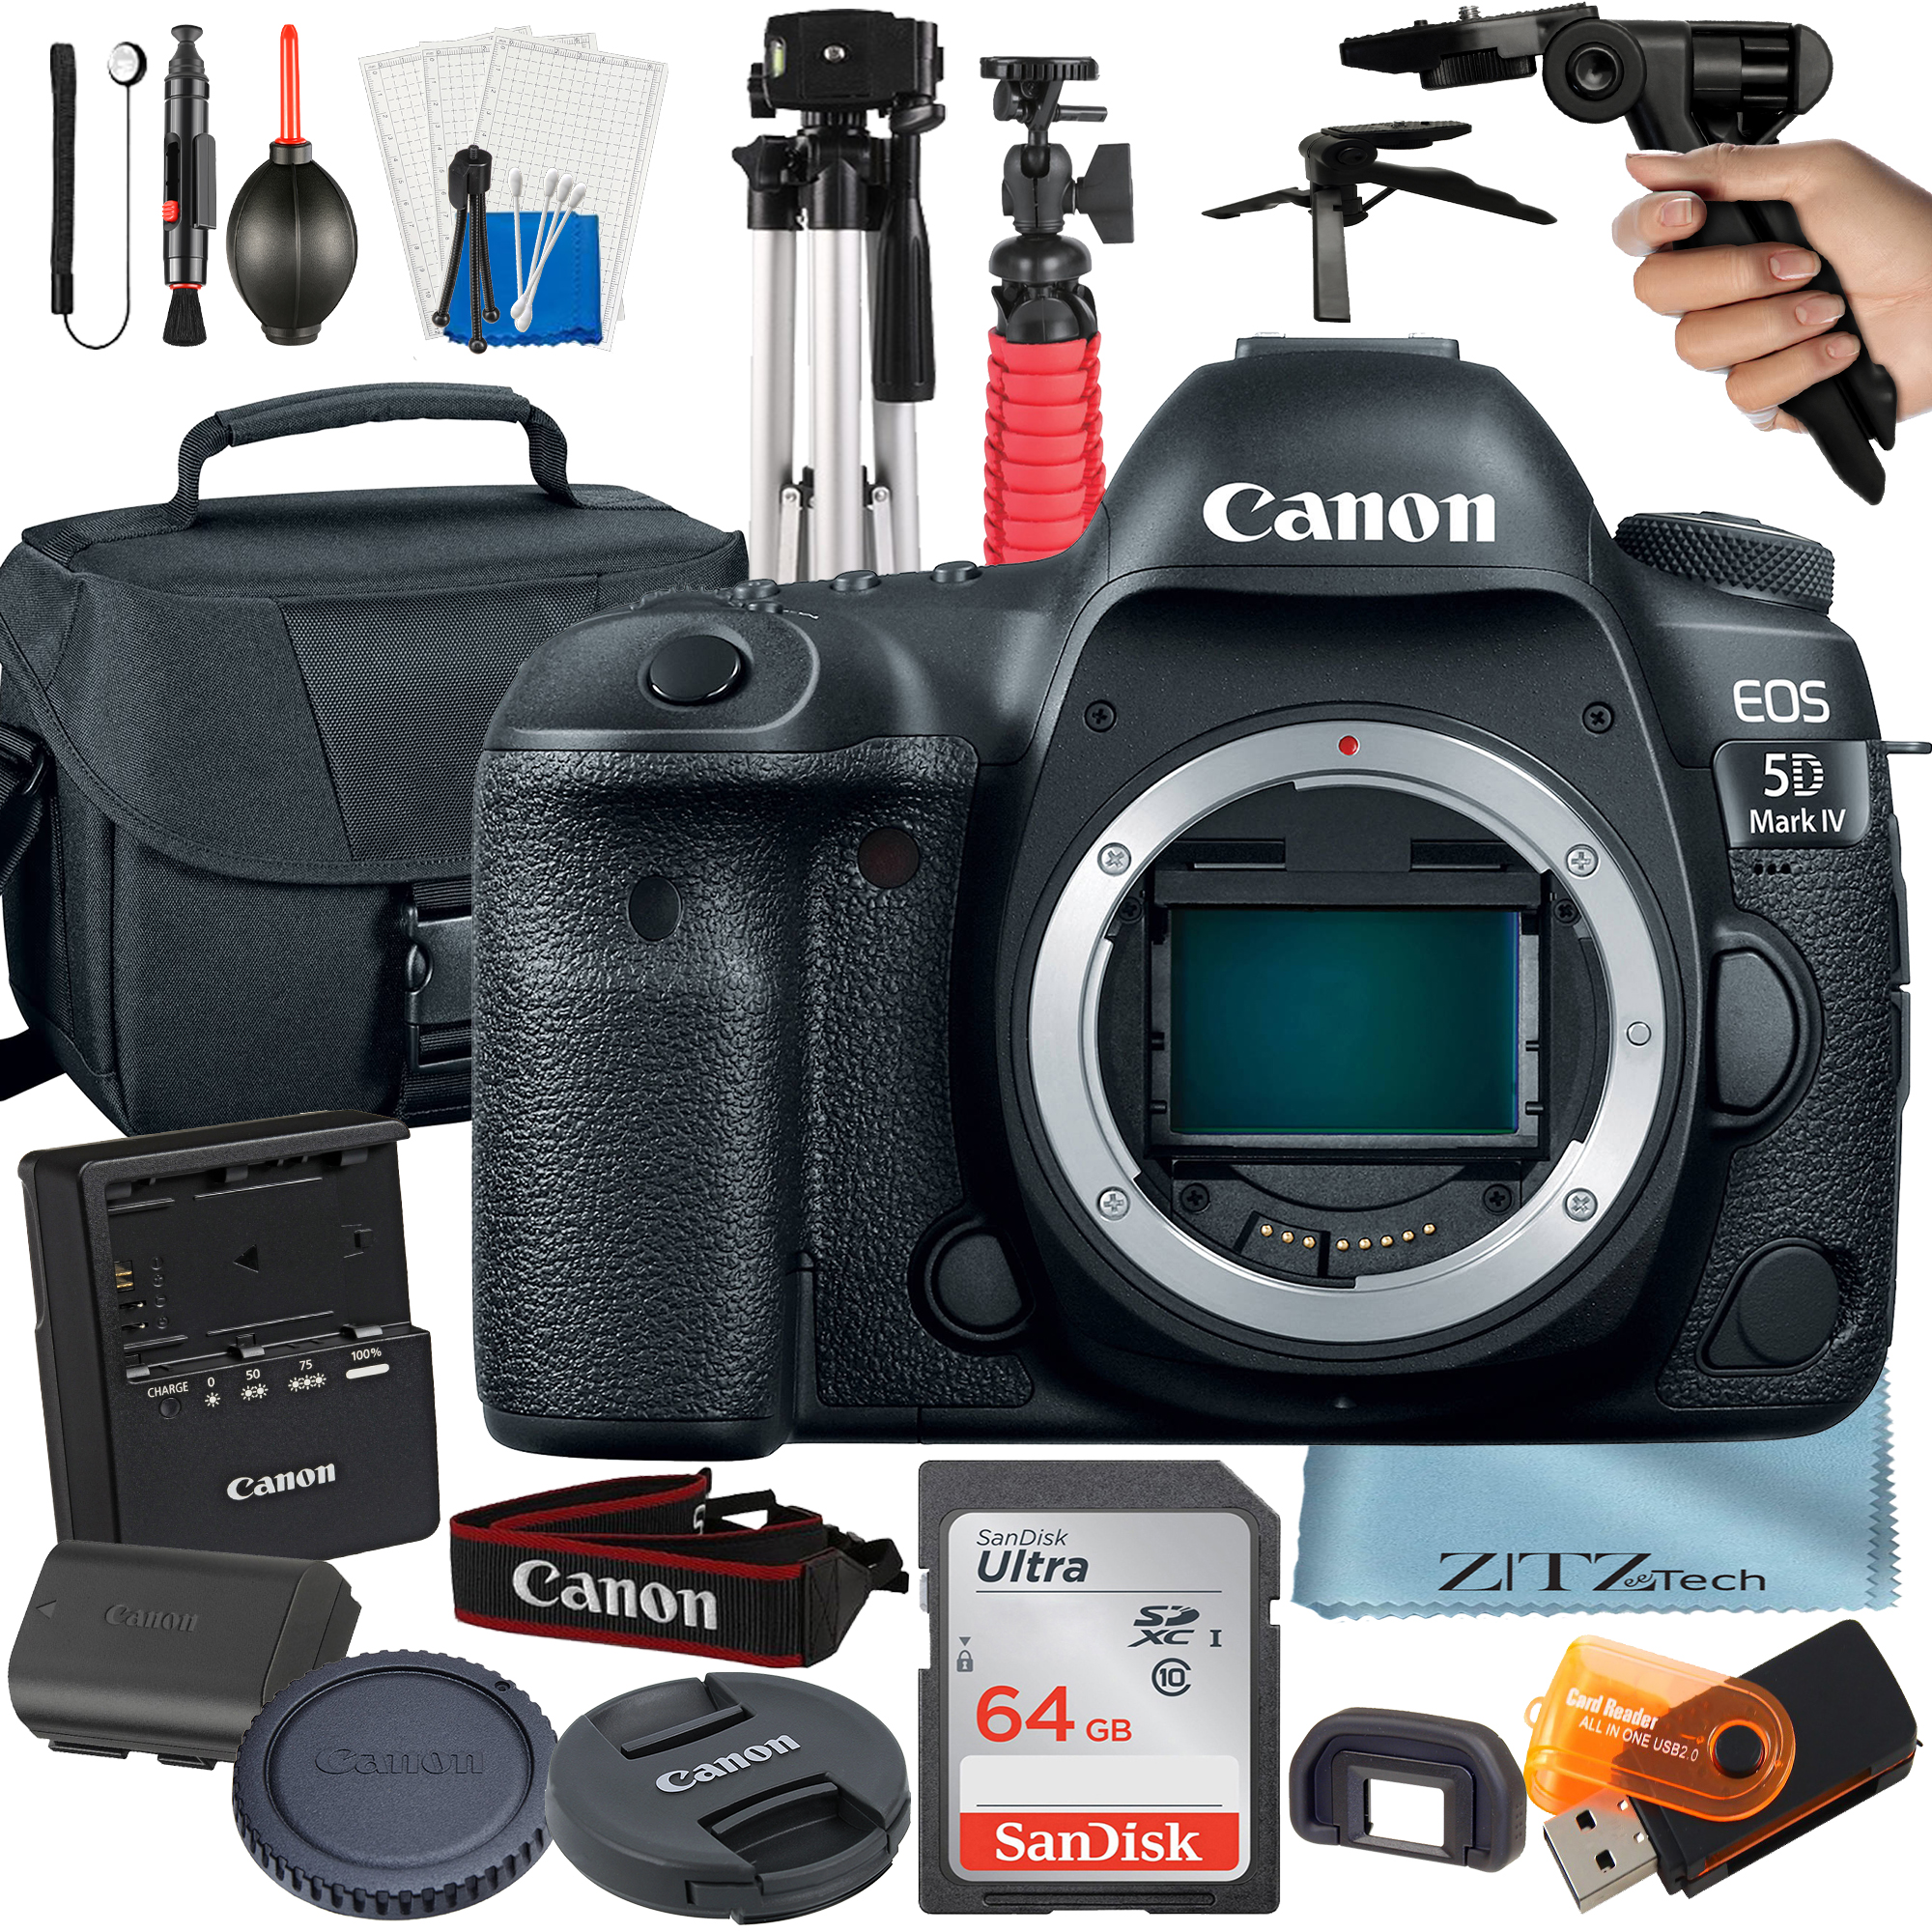 Canon EOS 5D Mark IV Full Frame DSLR Camera (Body Only) with SanDisk 64GB Card + Case + Tripod + ZeeTech Accesory